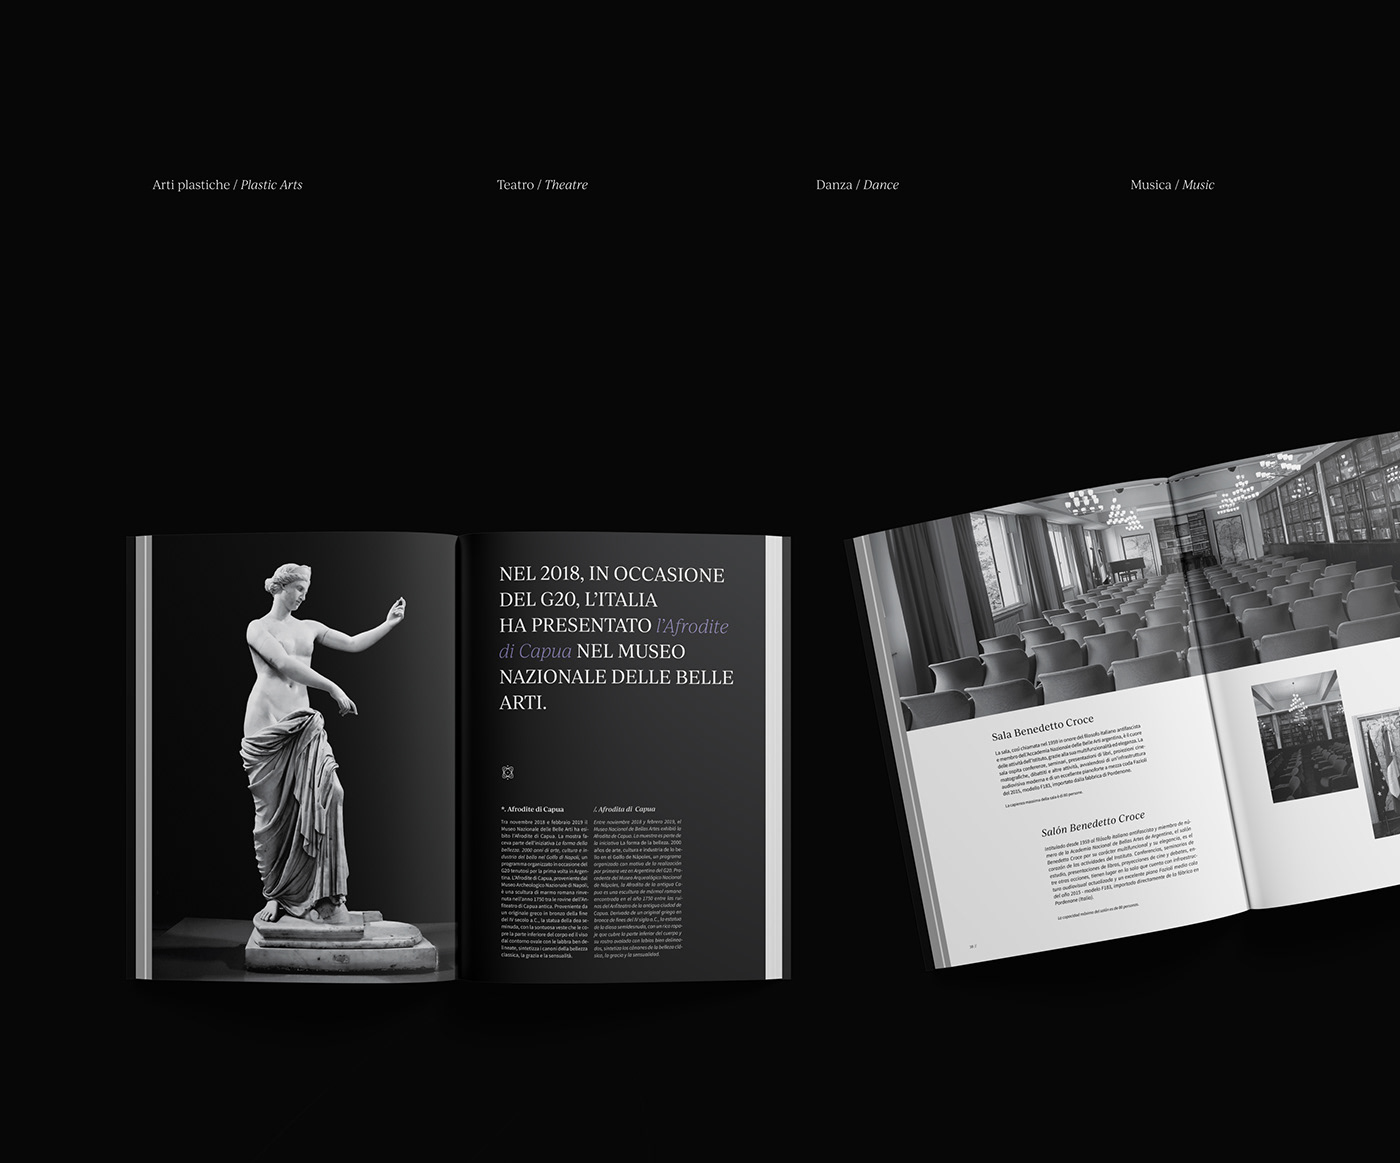 editorial design  Photography  graphic design  Borges typography   book Brutalism brand identity modern neoforge